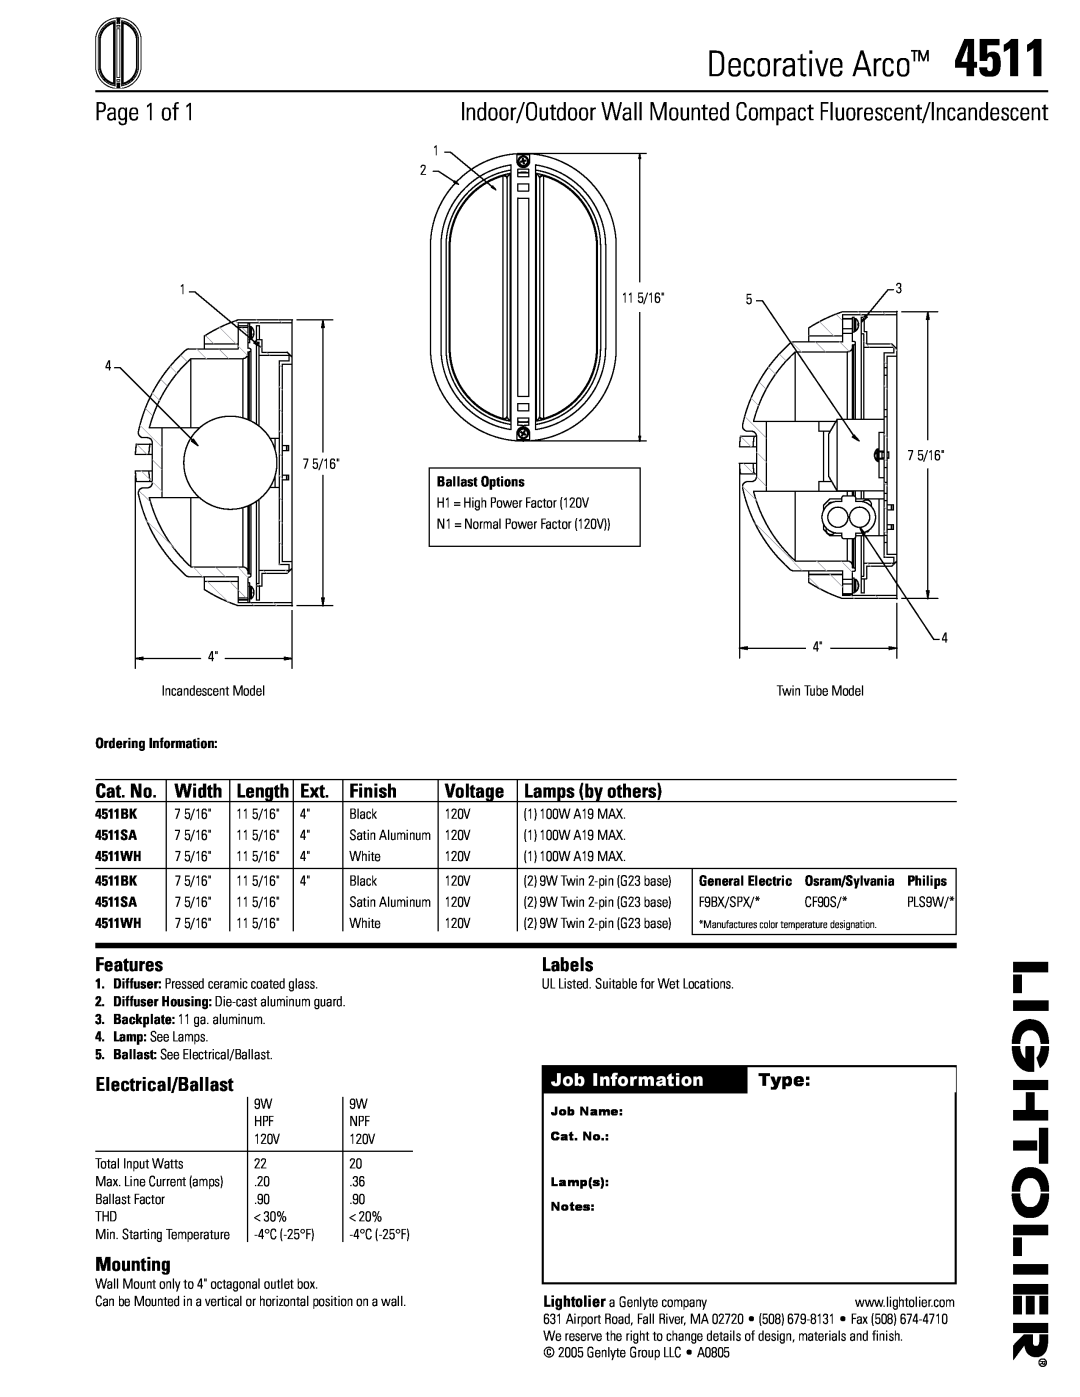 Lightolier 4511 manual Decorative Arco, Page 1 of, Width, Finish, Voltage, Lamps by others, Features, Labels, Mounting 